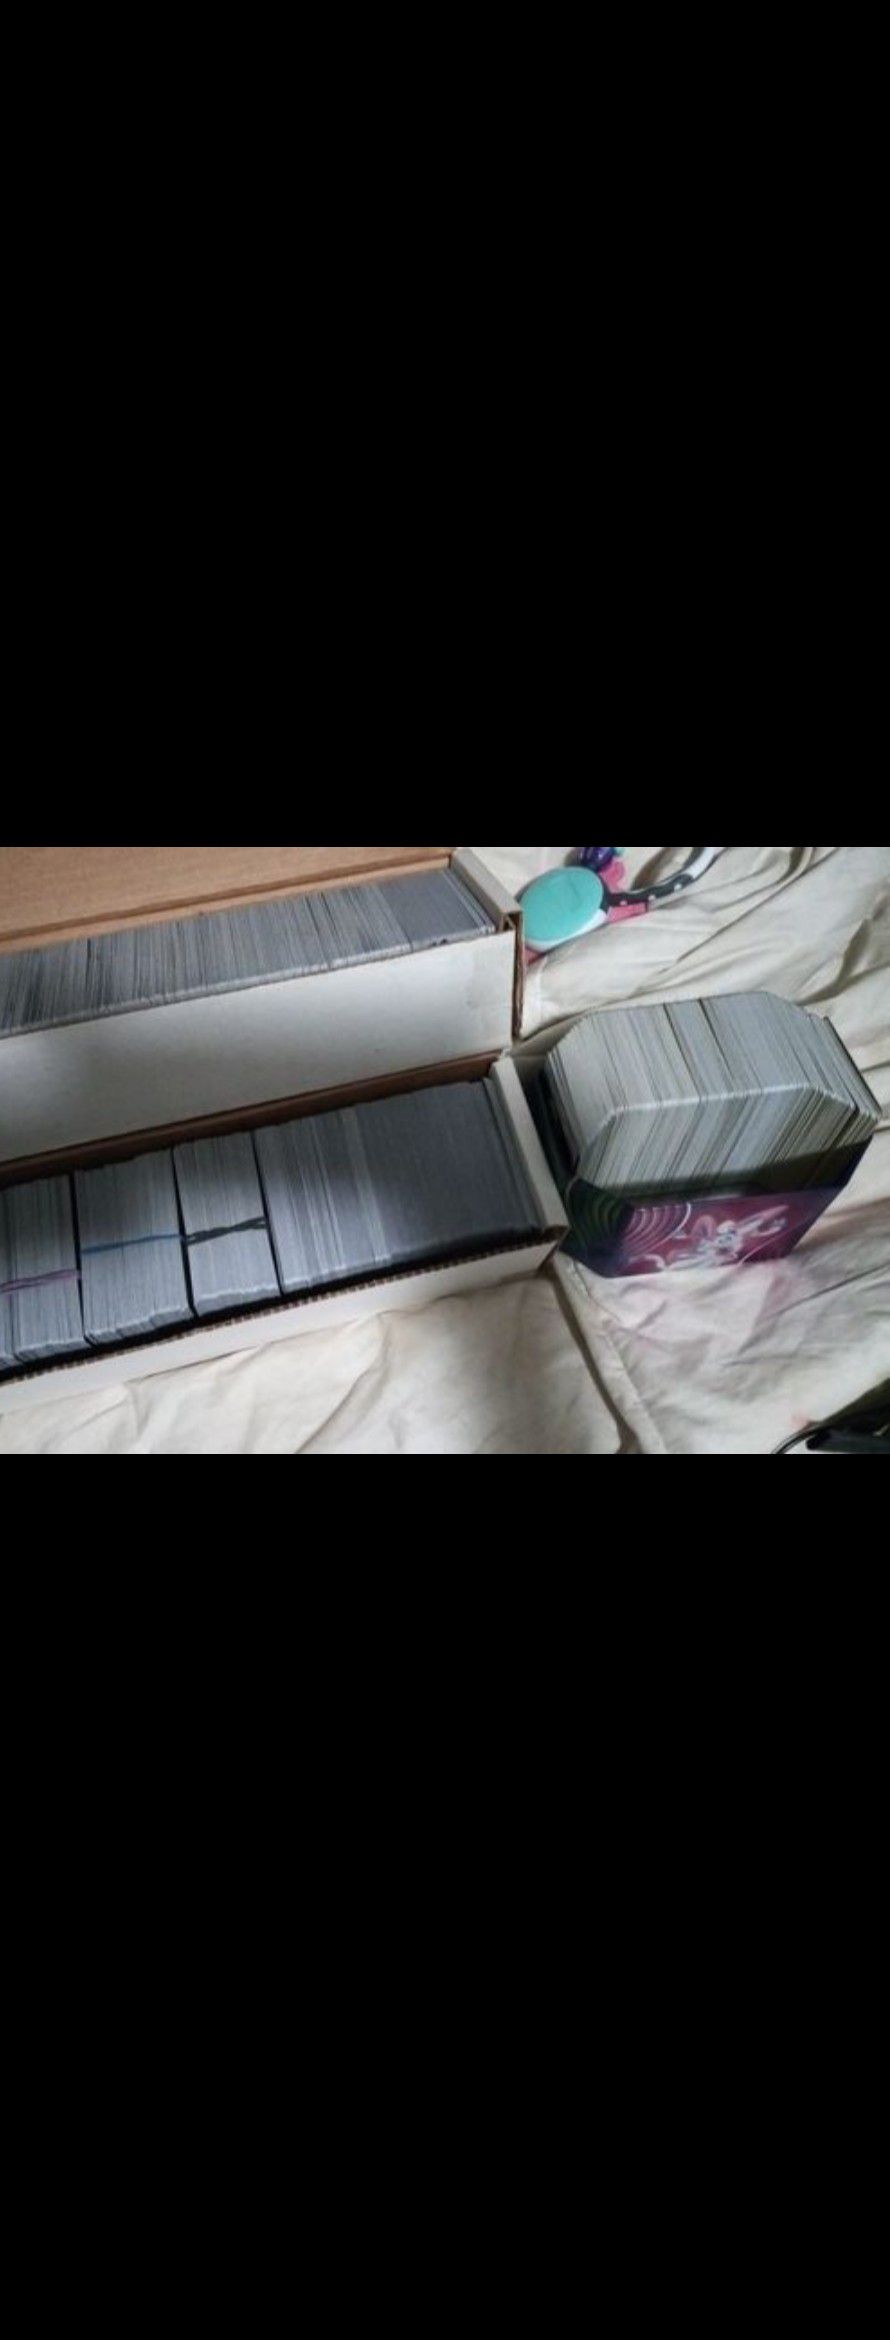 Pokemon bulk approx 2000 cards includes approx 200 rev holos as well